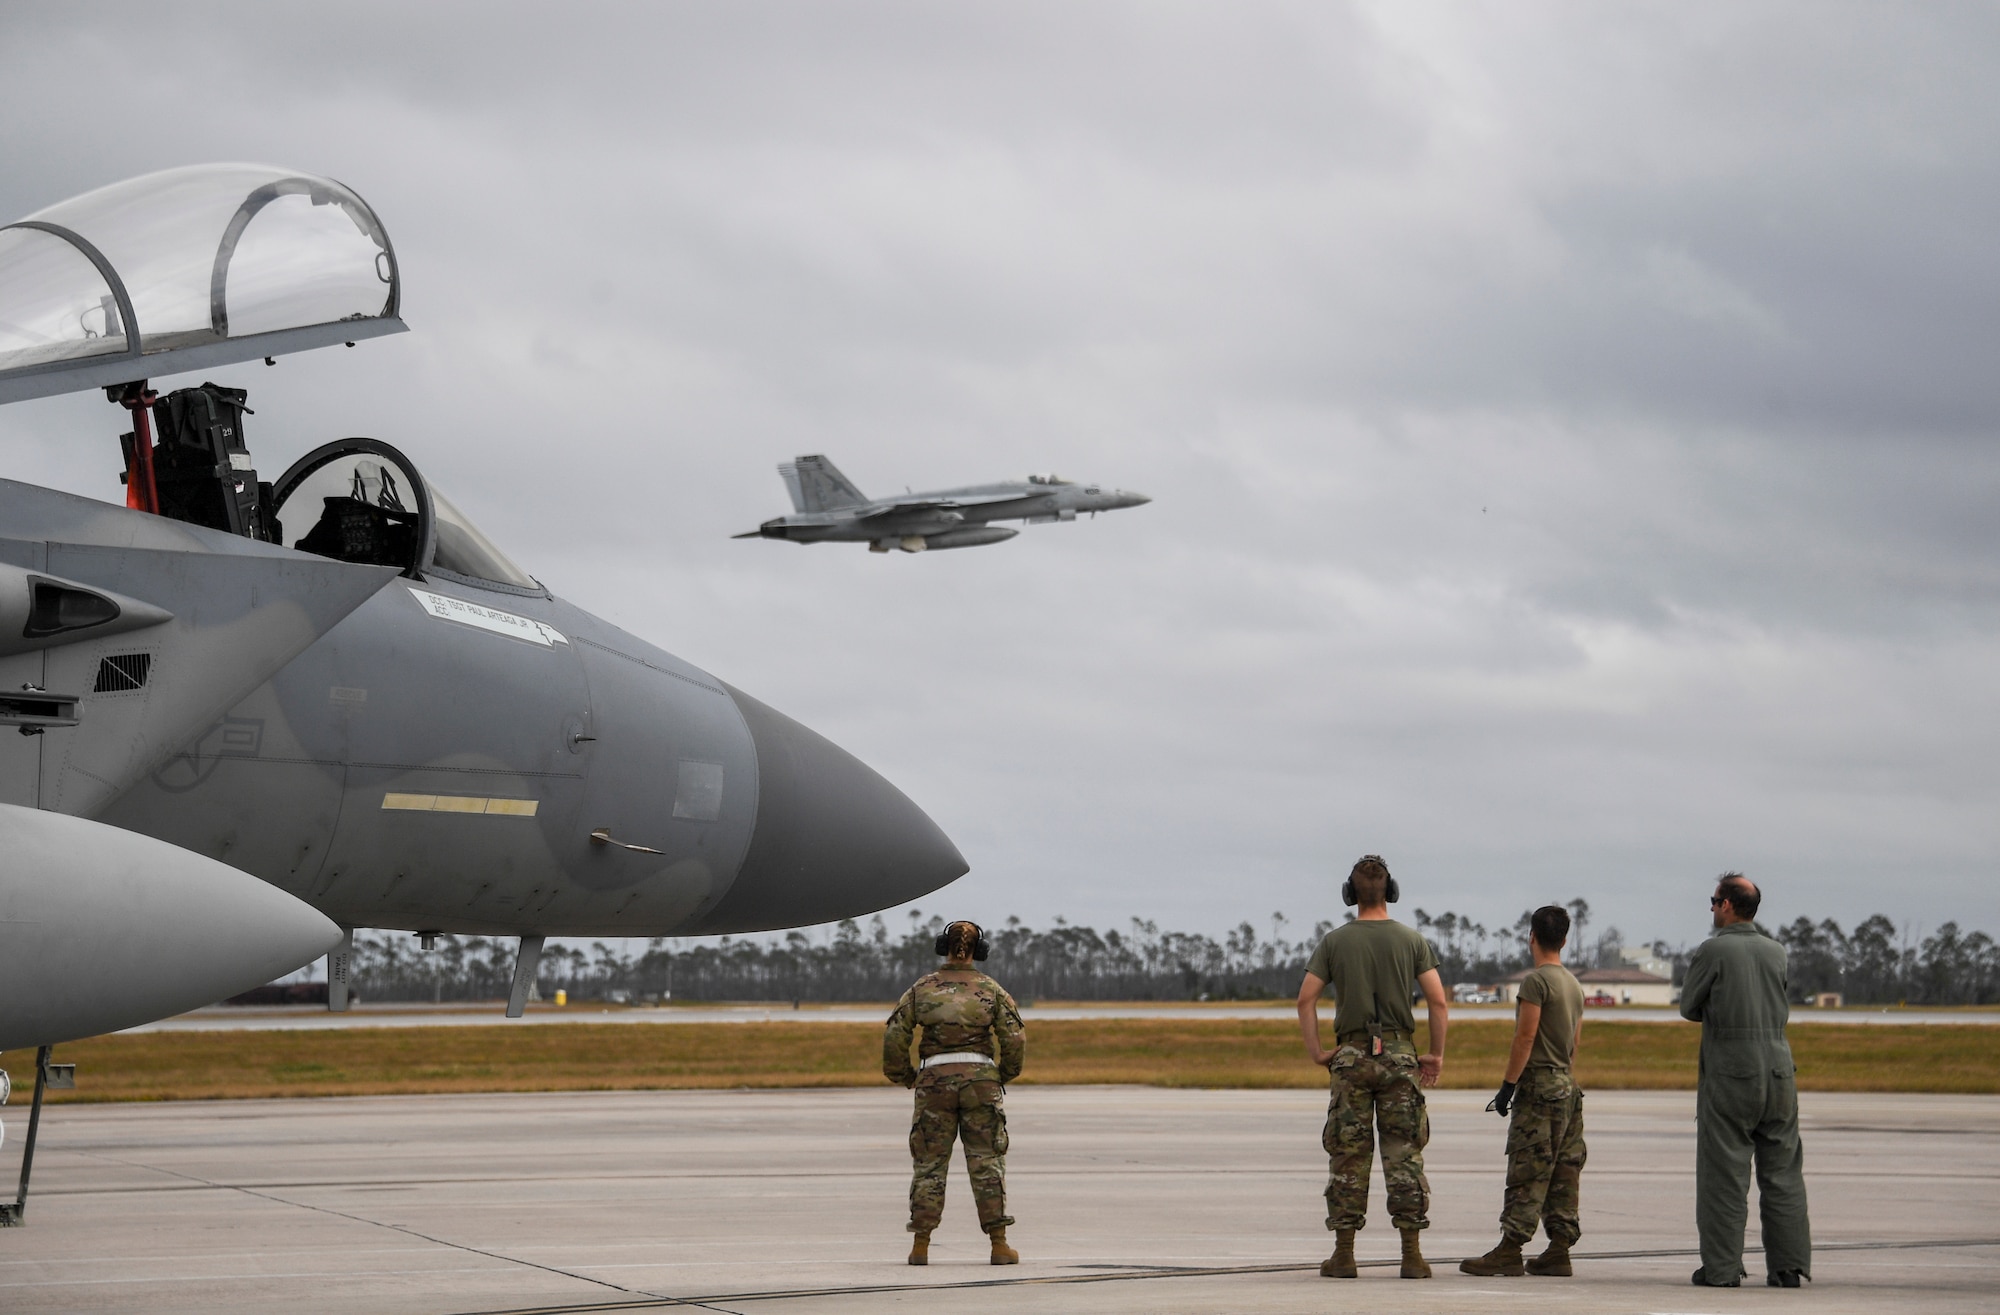 U.S. Air Force Airmen from the 144th watch a U.S. Navy F/A-18E Super Hornet fighter jet depart   Tyndall Air Force Base, Florida, Nov. 10, 2020 after the conclusion of  Checkered Flag.